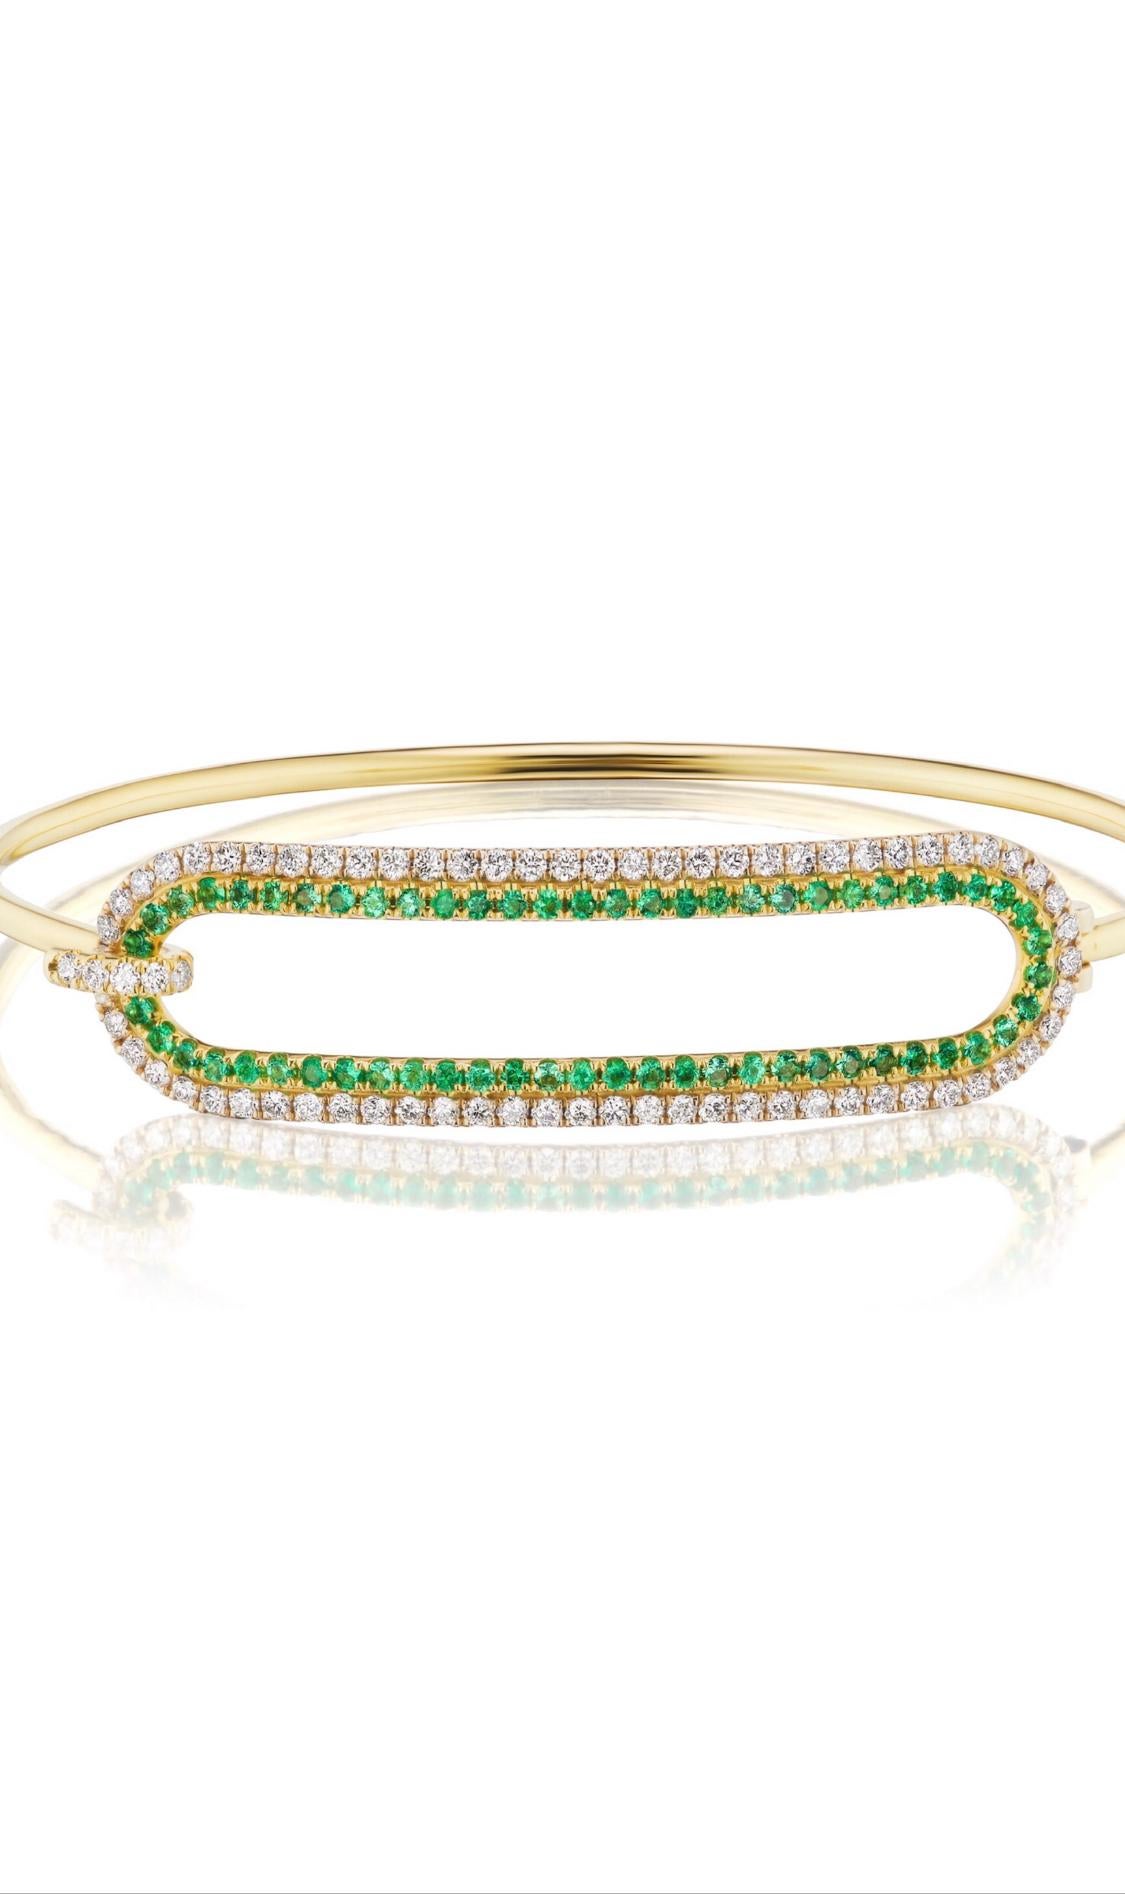 Andrew Glassford's 2mm Tension Bracelet in 18K gold with .89 carats of round Emeralds and 1.13 carats of GH VSI Diamonds that creates a stunning 